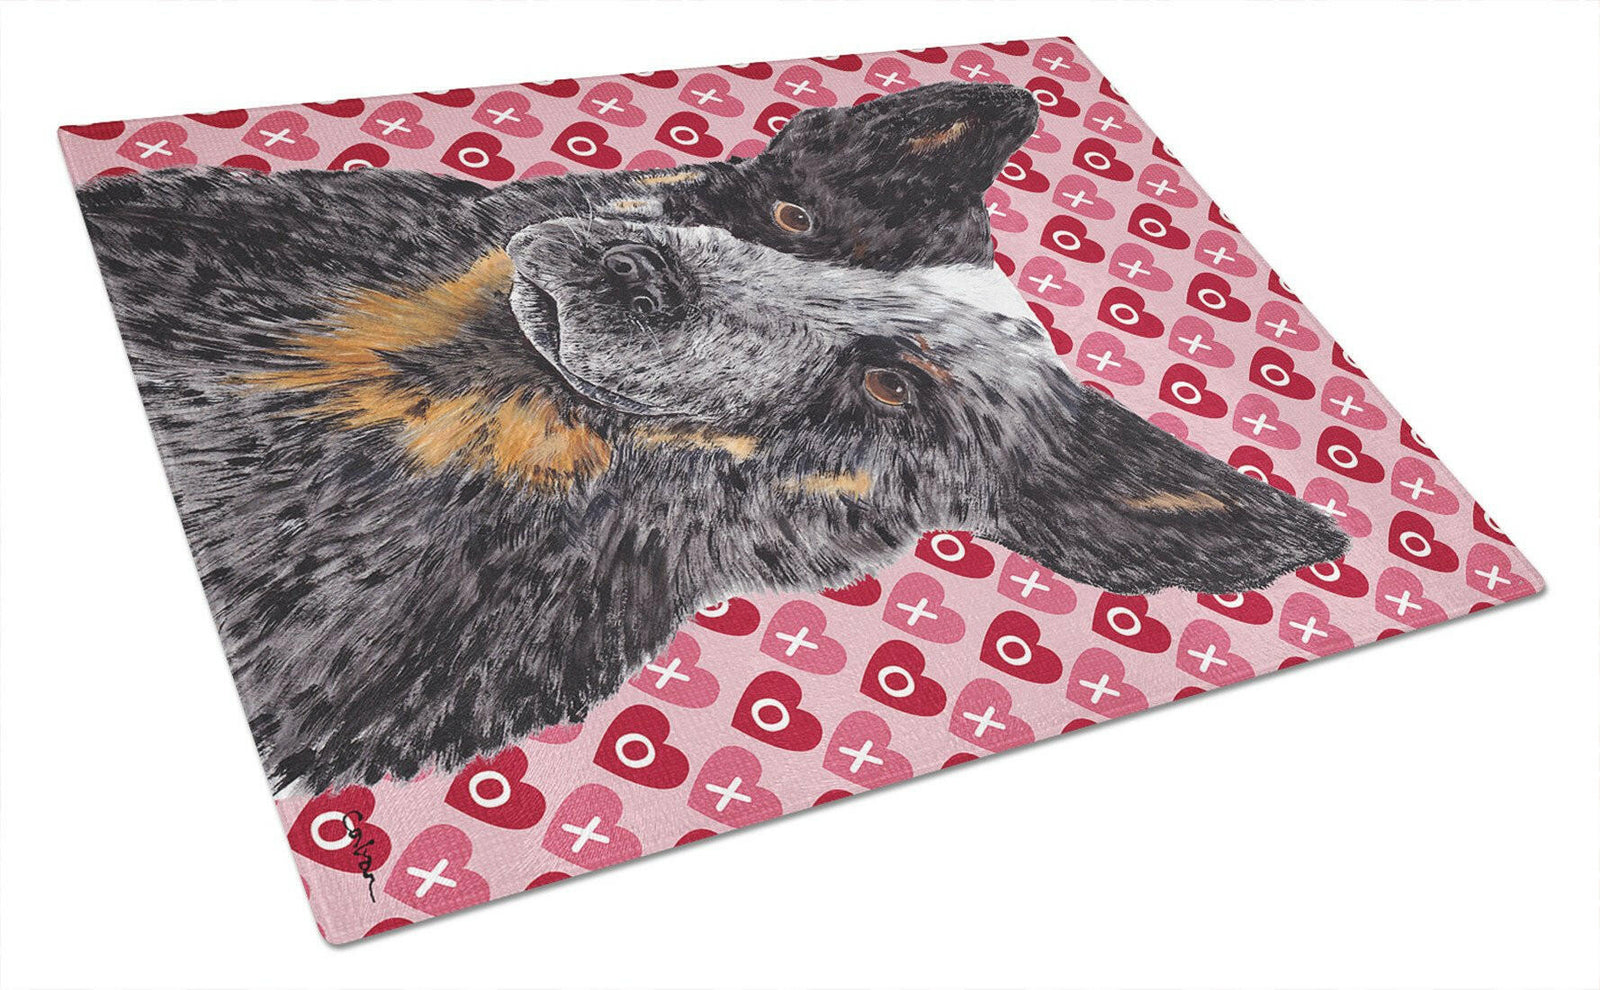 Australian Cattle Dog Hearts Love and Valentine's Day Glass Cutting Board Large by Caroline's Treasures